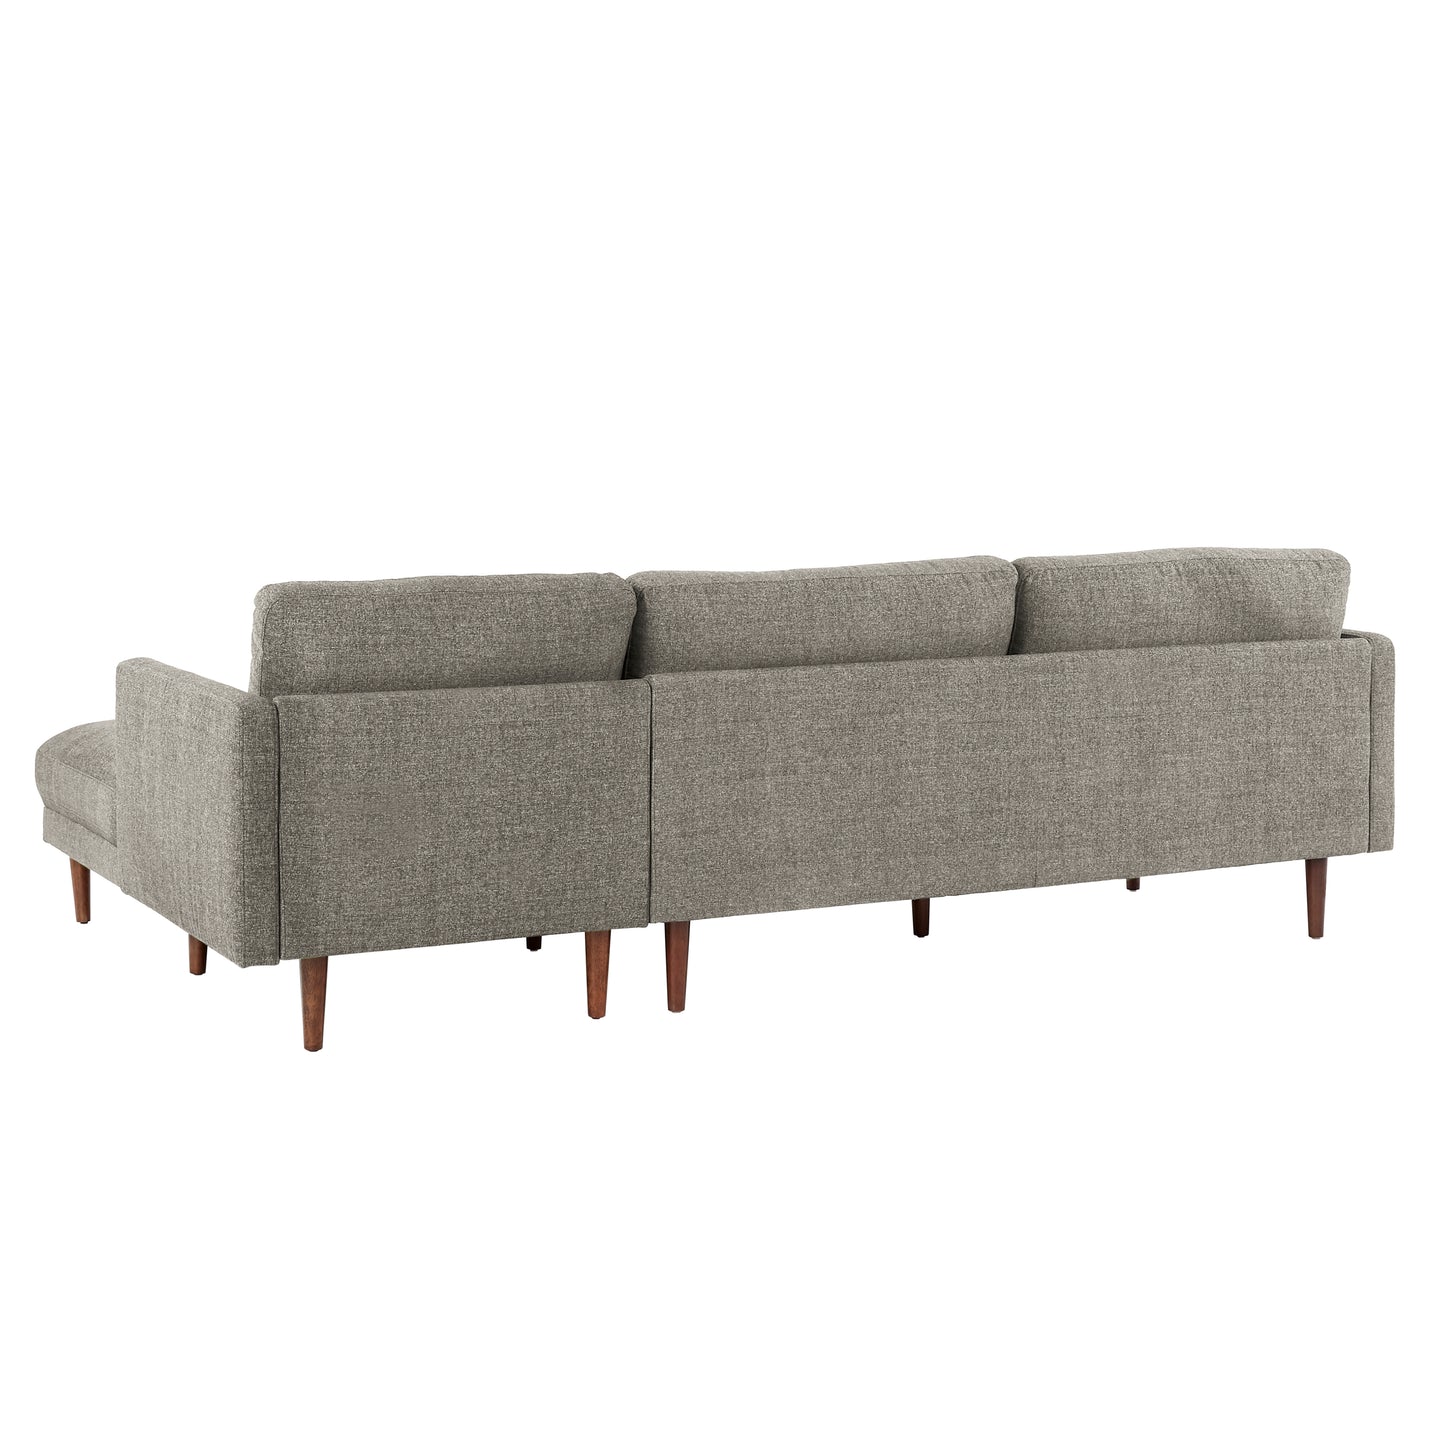 Mid-Century Upholstered Sectional Sofa - Light Grey, 3-Seat Sectional with Right-Facing Chaise